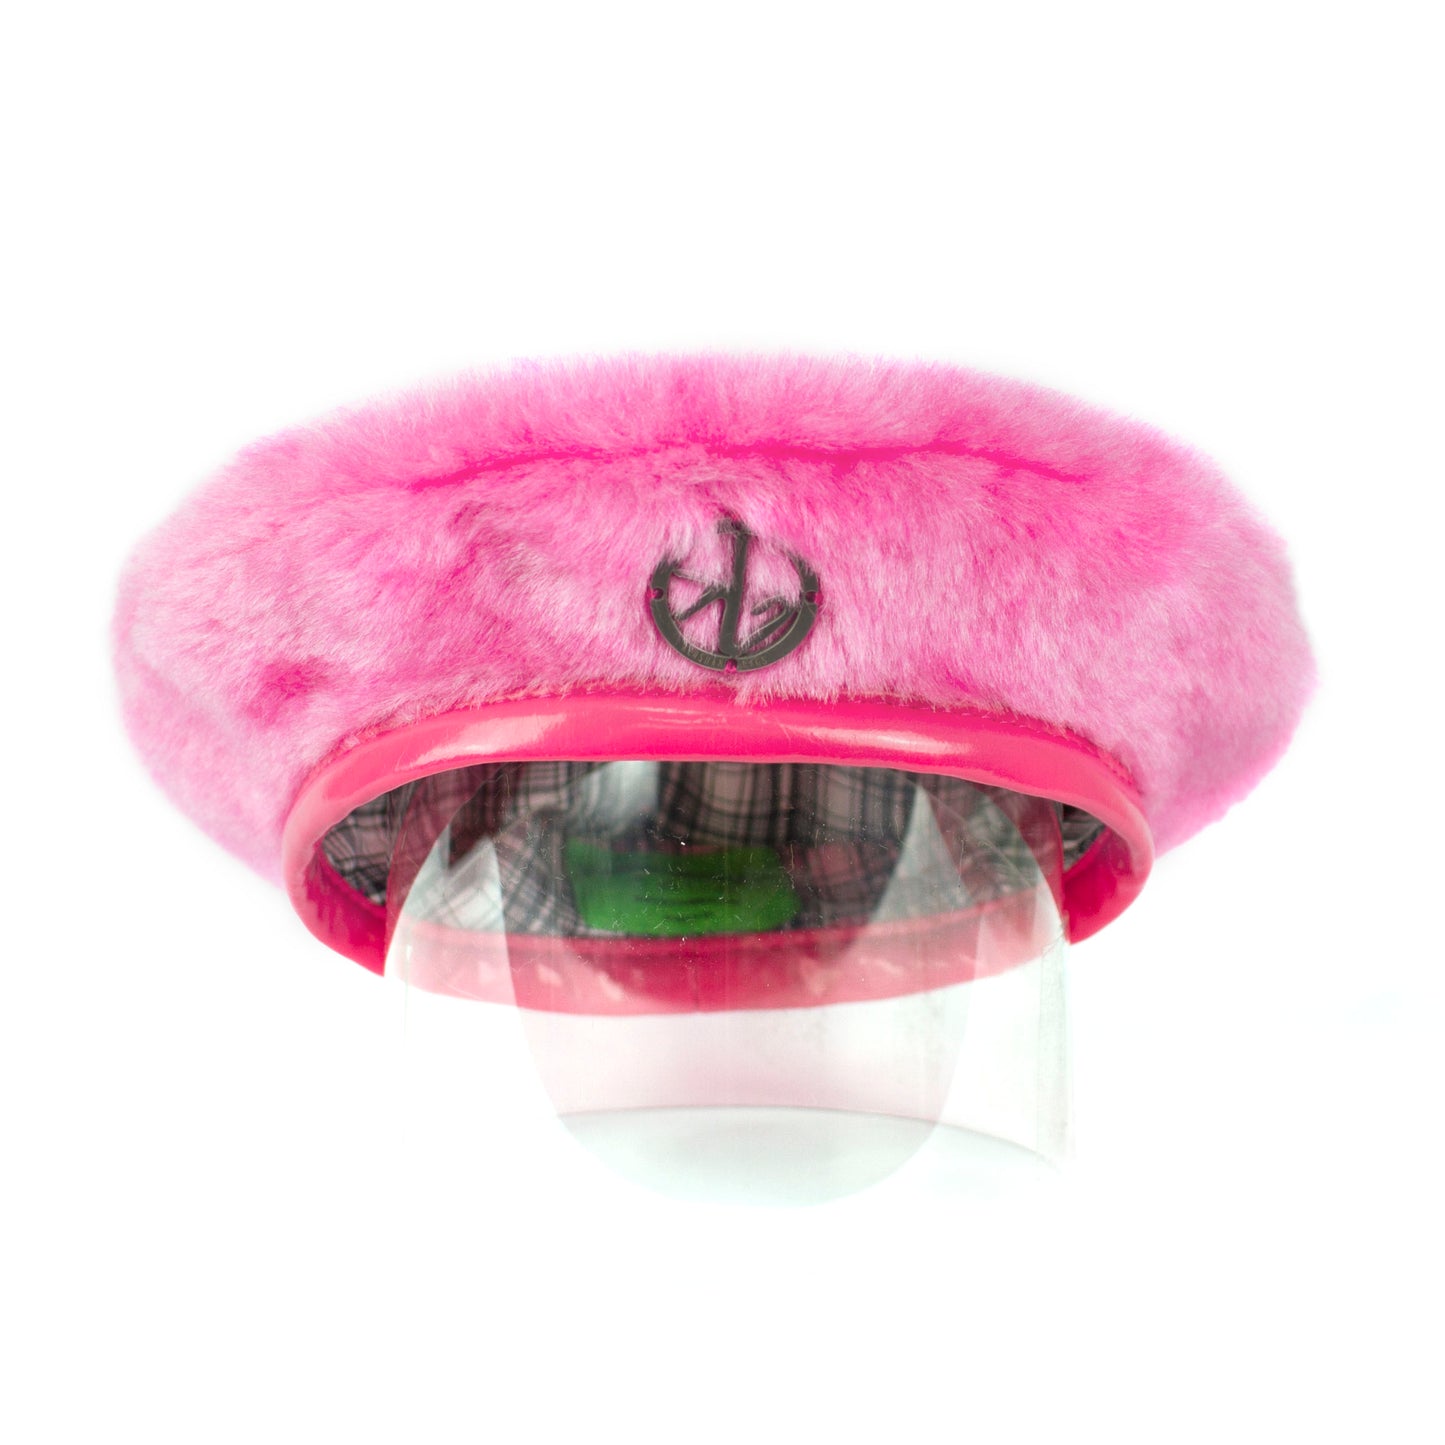 "PINK" French beret hat